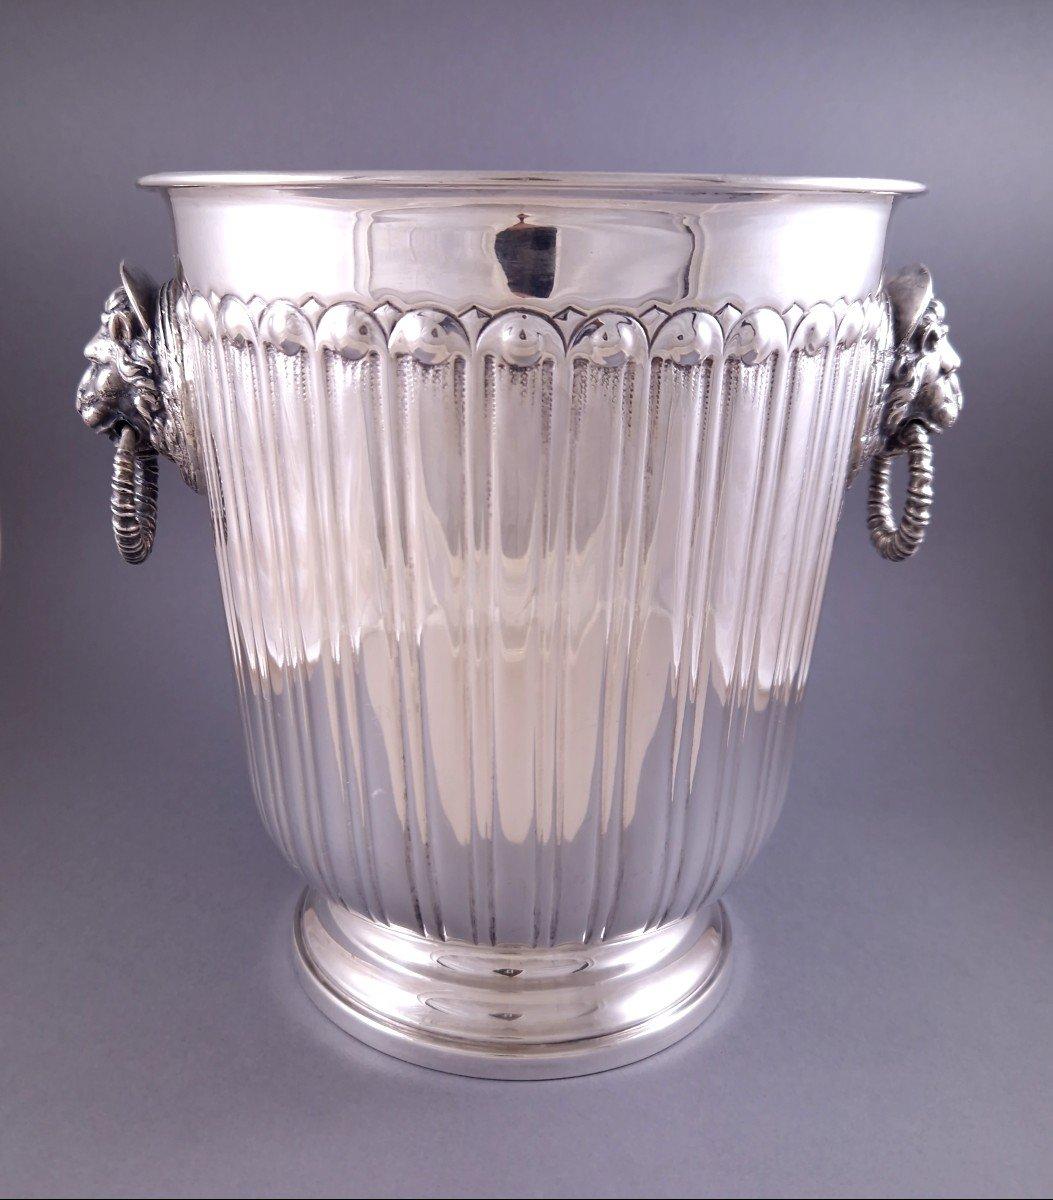 Champagne bucket in sterling silver decorated with flutes, the grips in the shape of lion heads 
Italian work from the 20th century 
800 Silver hallmark
Height: 22 cm 
Diameter without the grips: 19.6 cm 
Weight: 1055 grams